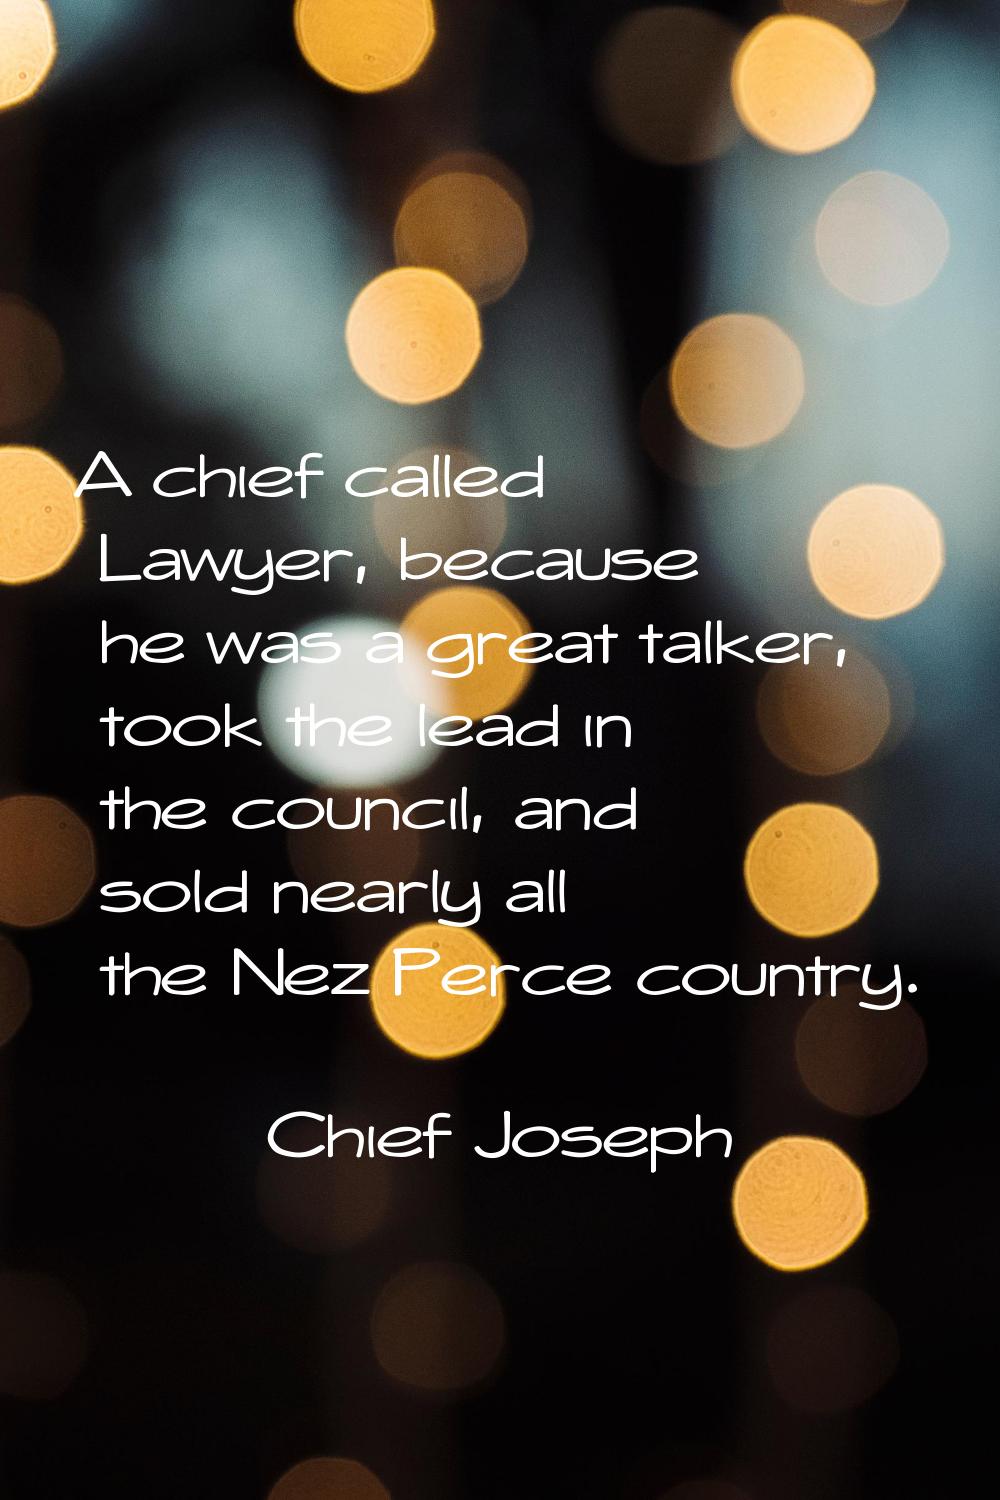 A chief called Lawyer, because he was a great talker, took the lead in the council, and sold nearly